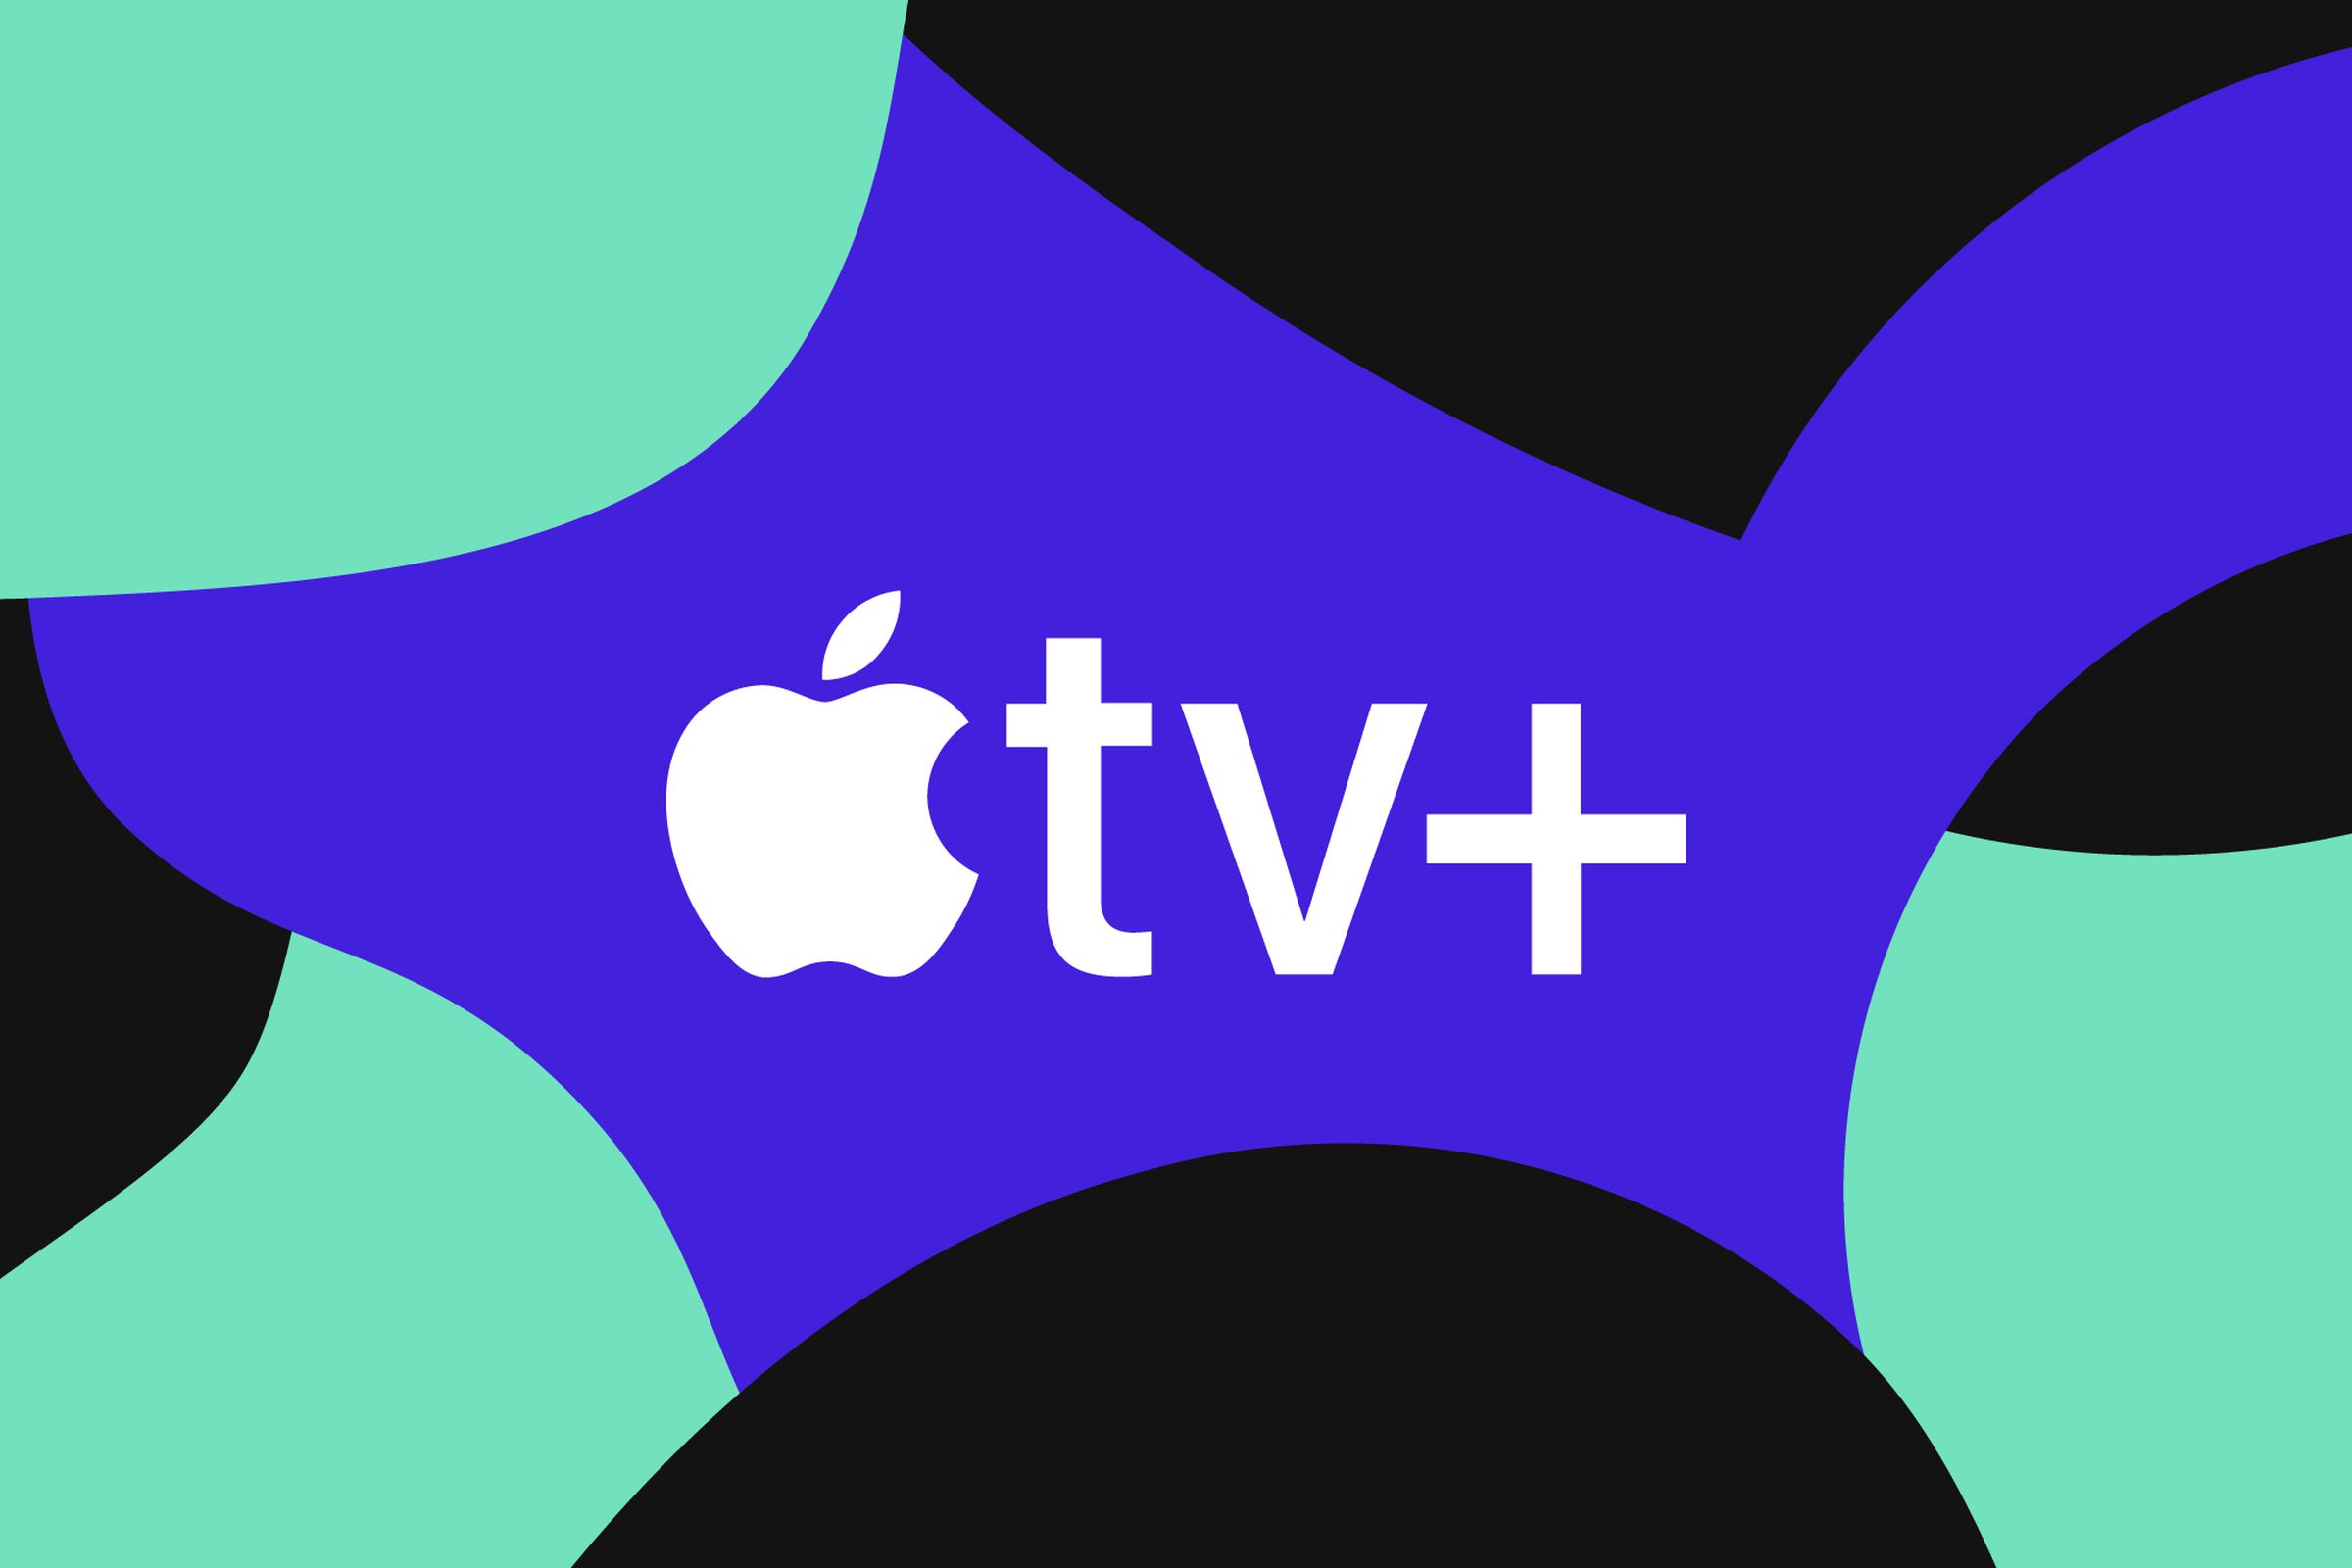 Apple TV Plus logo on a multicolored blue, black, and green background